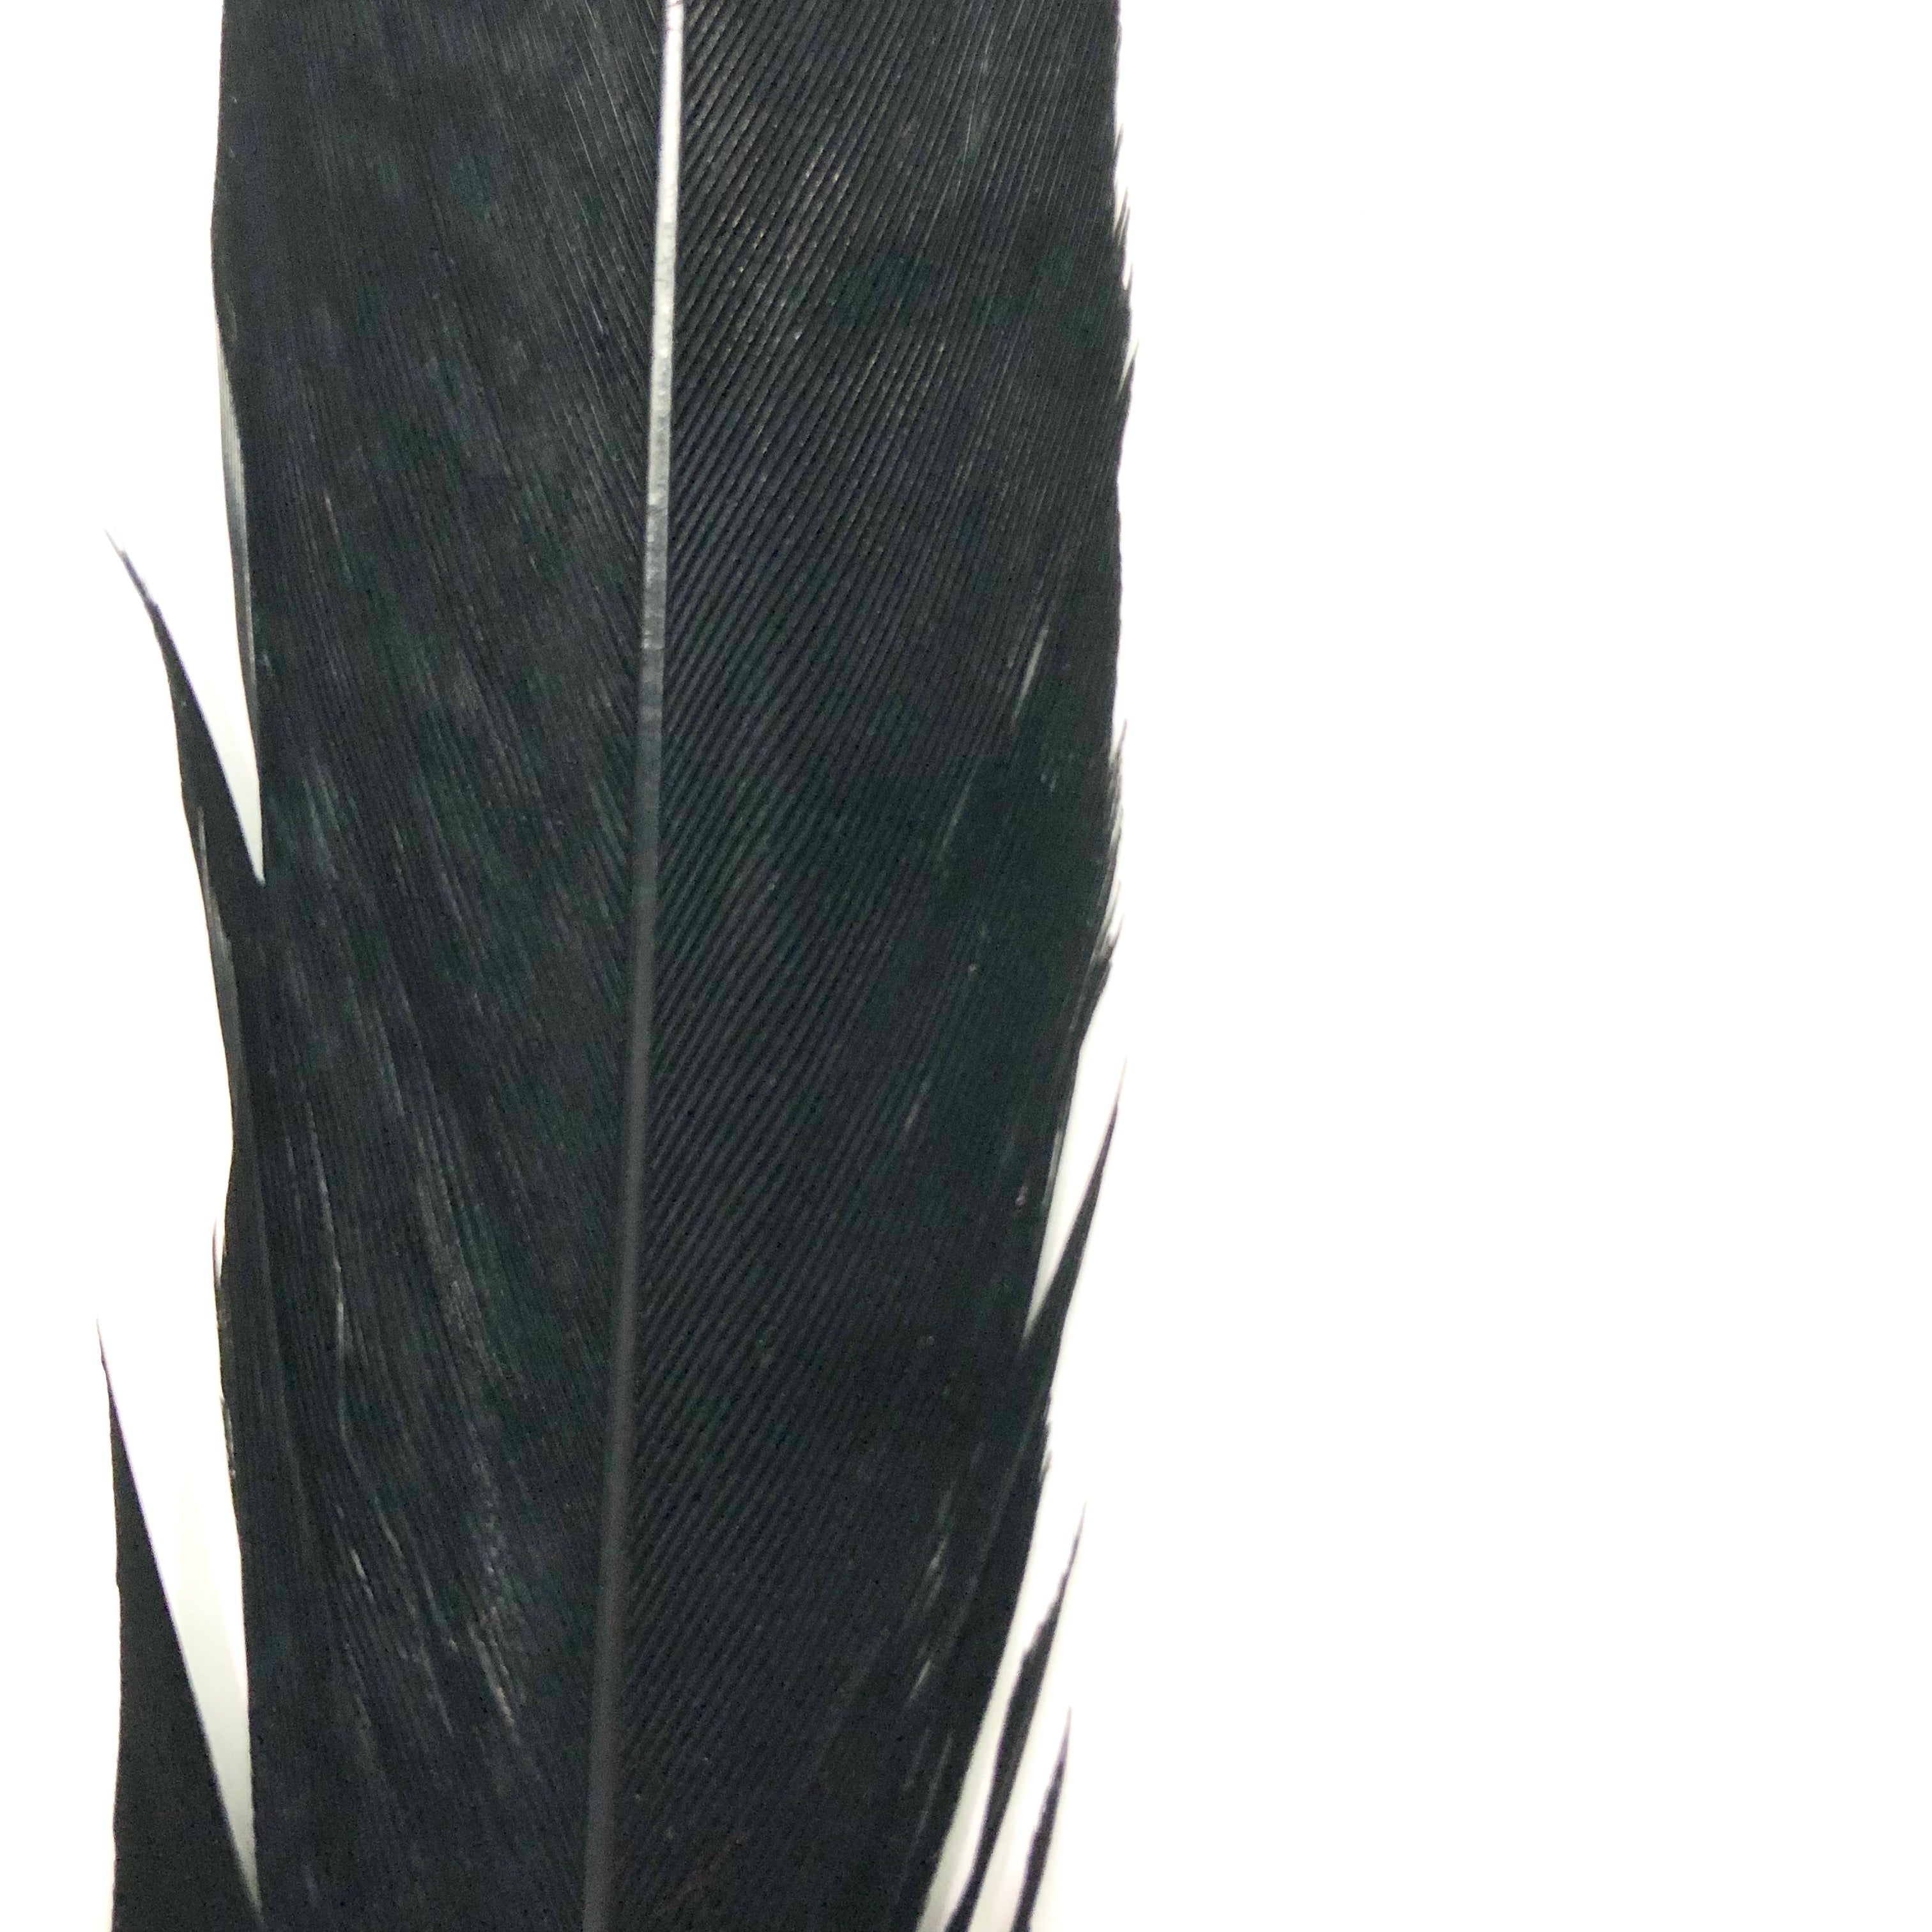 10" to 20" Lady Amherst Pheasant Side Tail Feather - Black ((SECONDS))